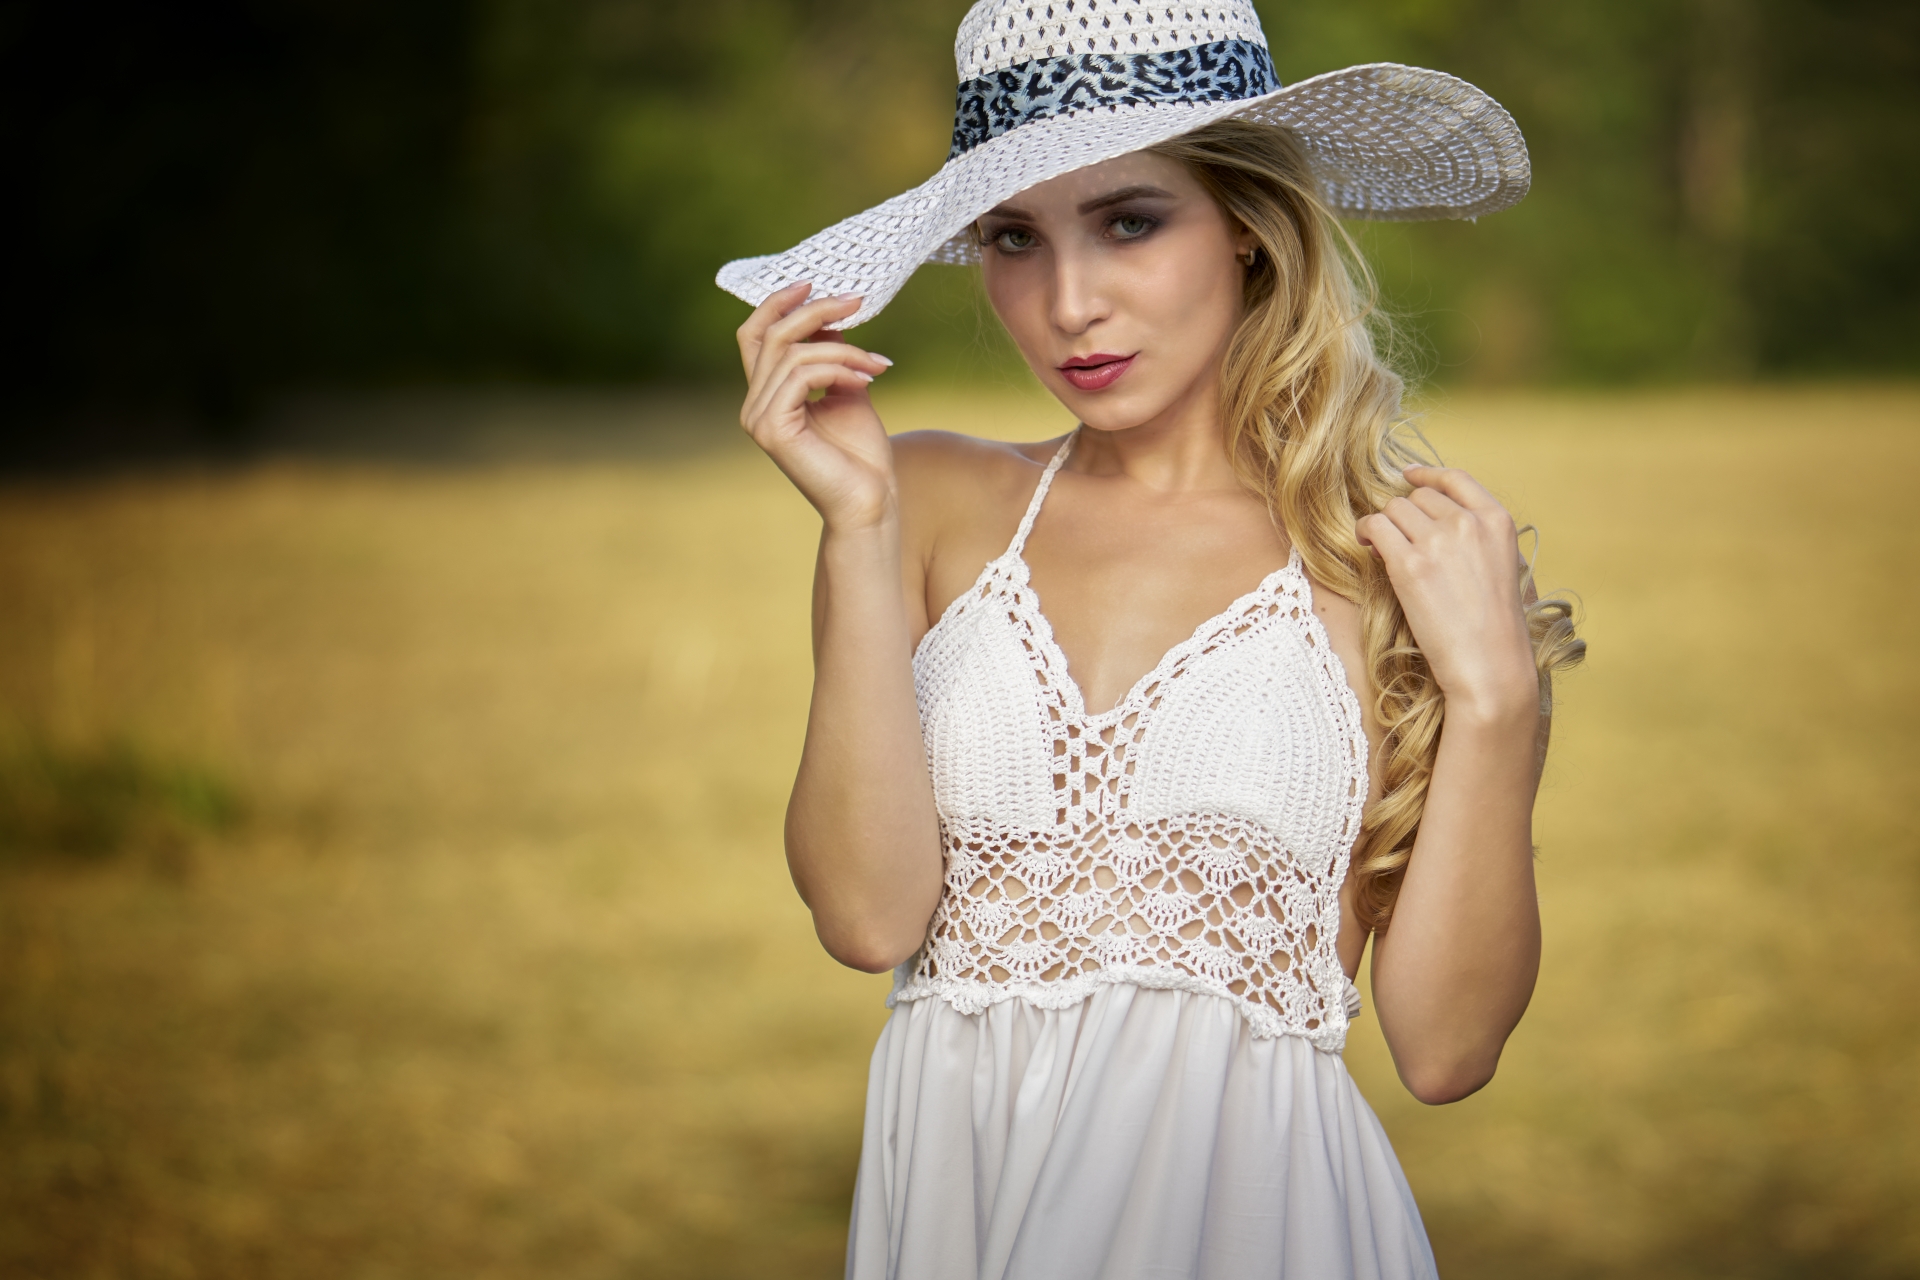 looking-at-viewer. women-with-hats. outdoors. portrait. sophia-kreith-lohr....